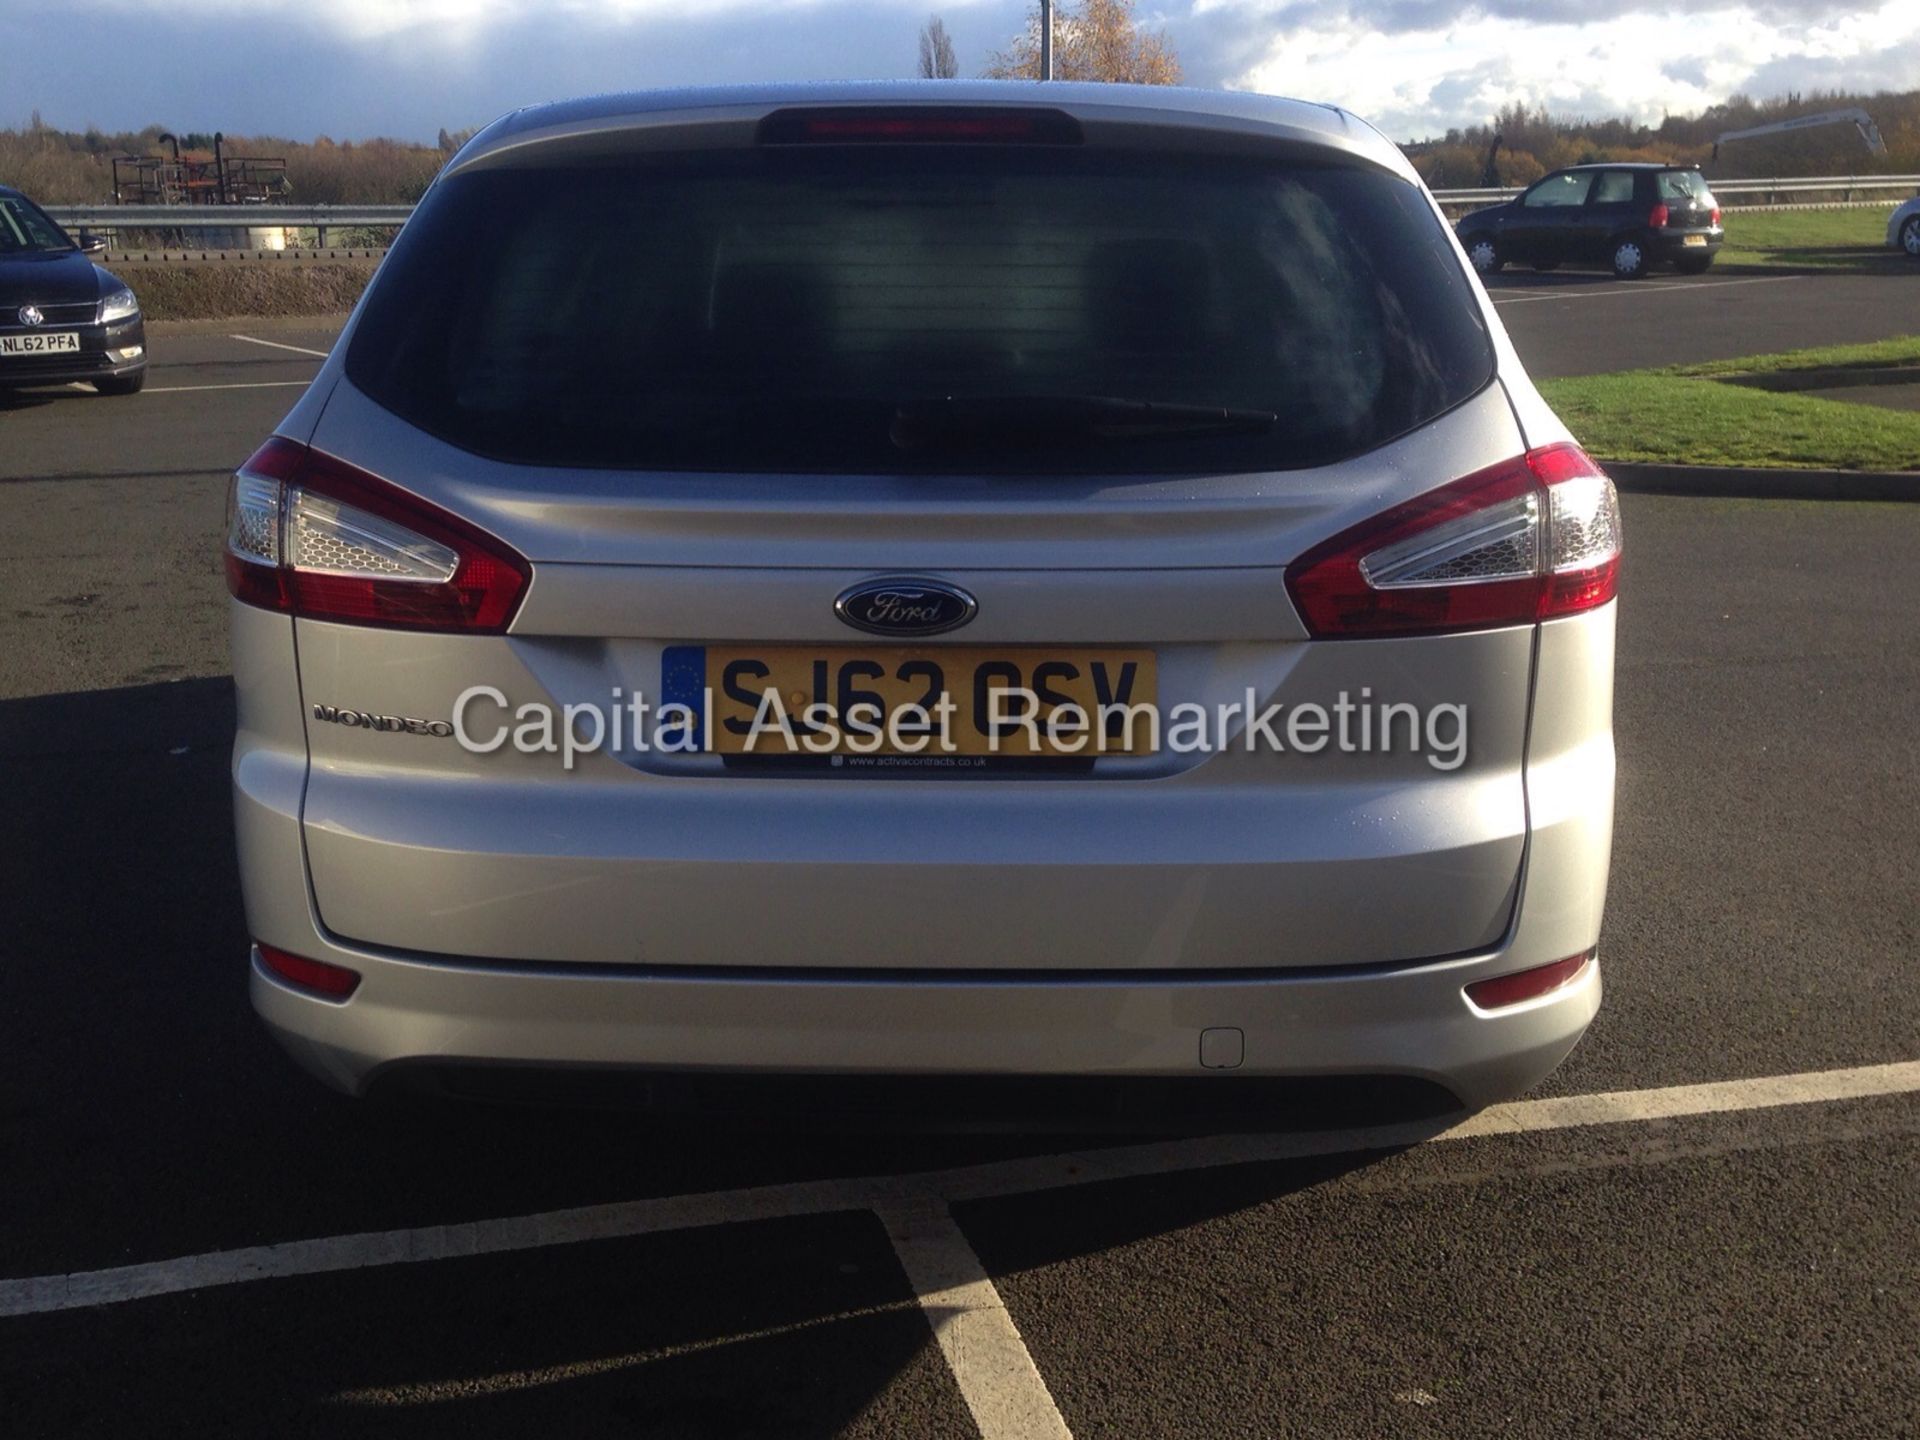 FORD MONDEO 'DIESEL' ESTATE (2013 SPEC) 2.0 TDCI - 140 PS - 6 SPEED - AIR CON (1 OWNER FROM NEW) - Image 5 of 15